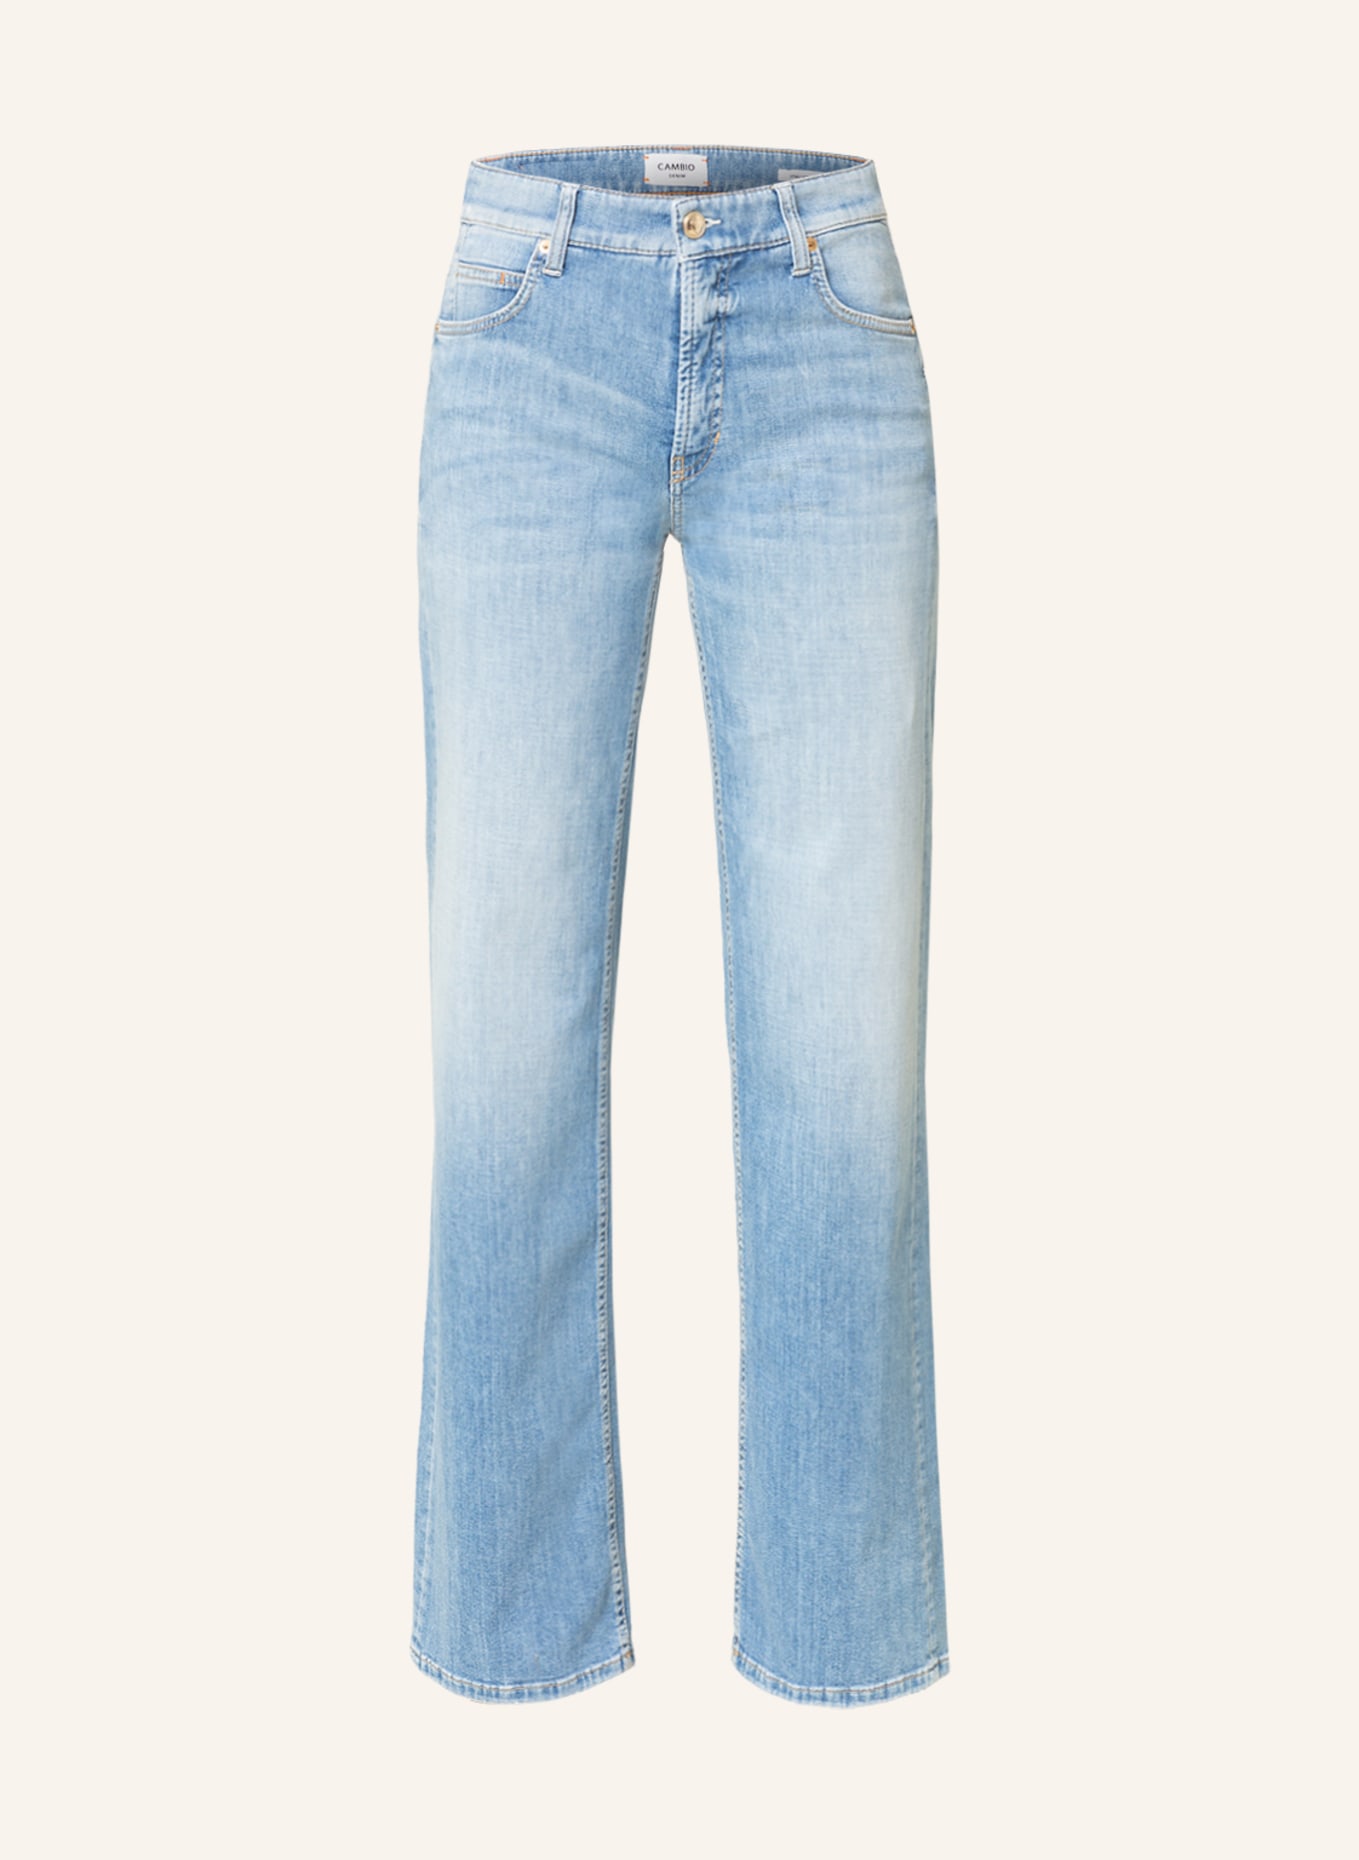 CAMBIO Jeans AIMEE, Farbe: 5295 summer contrast used (Bild 1)